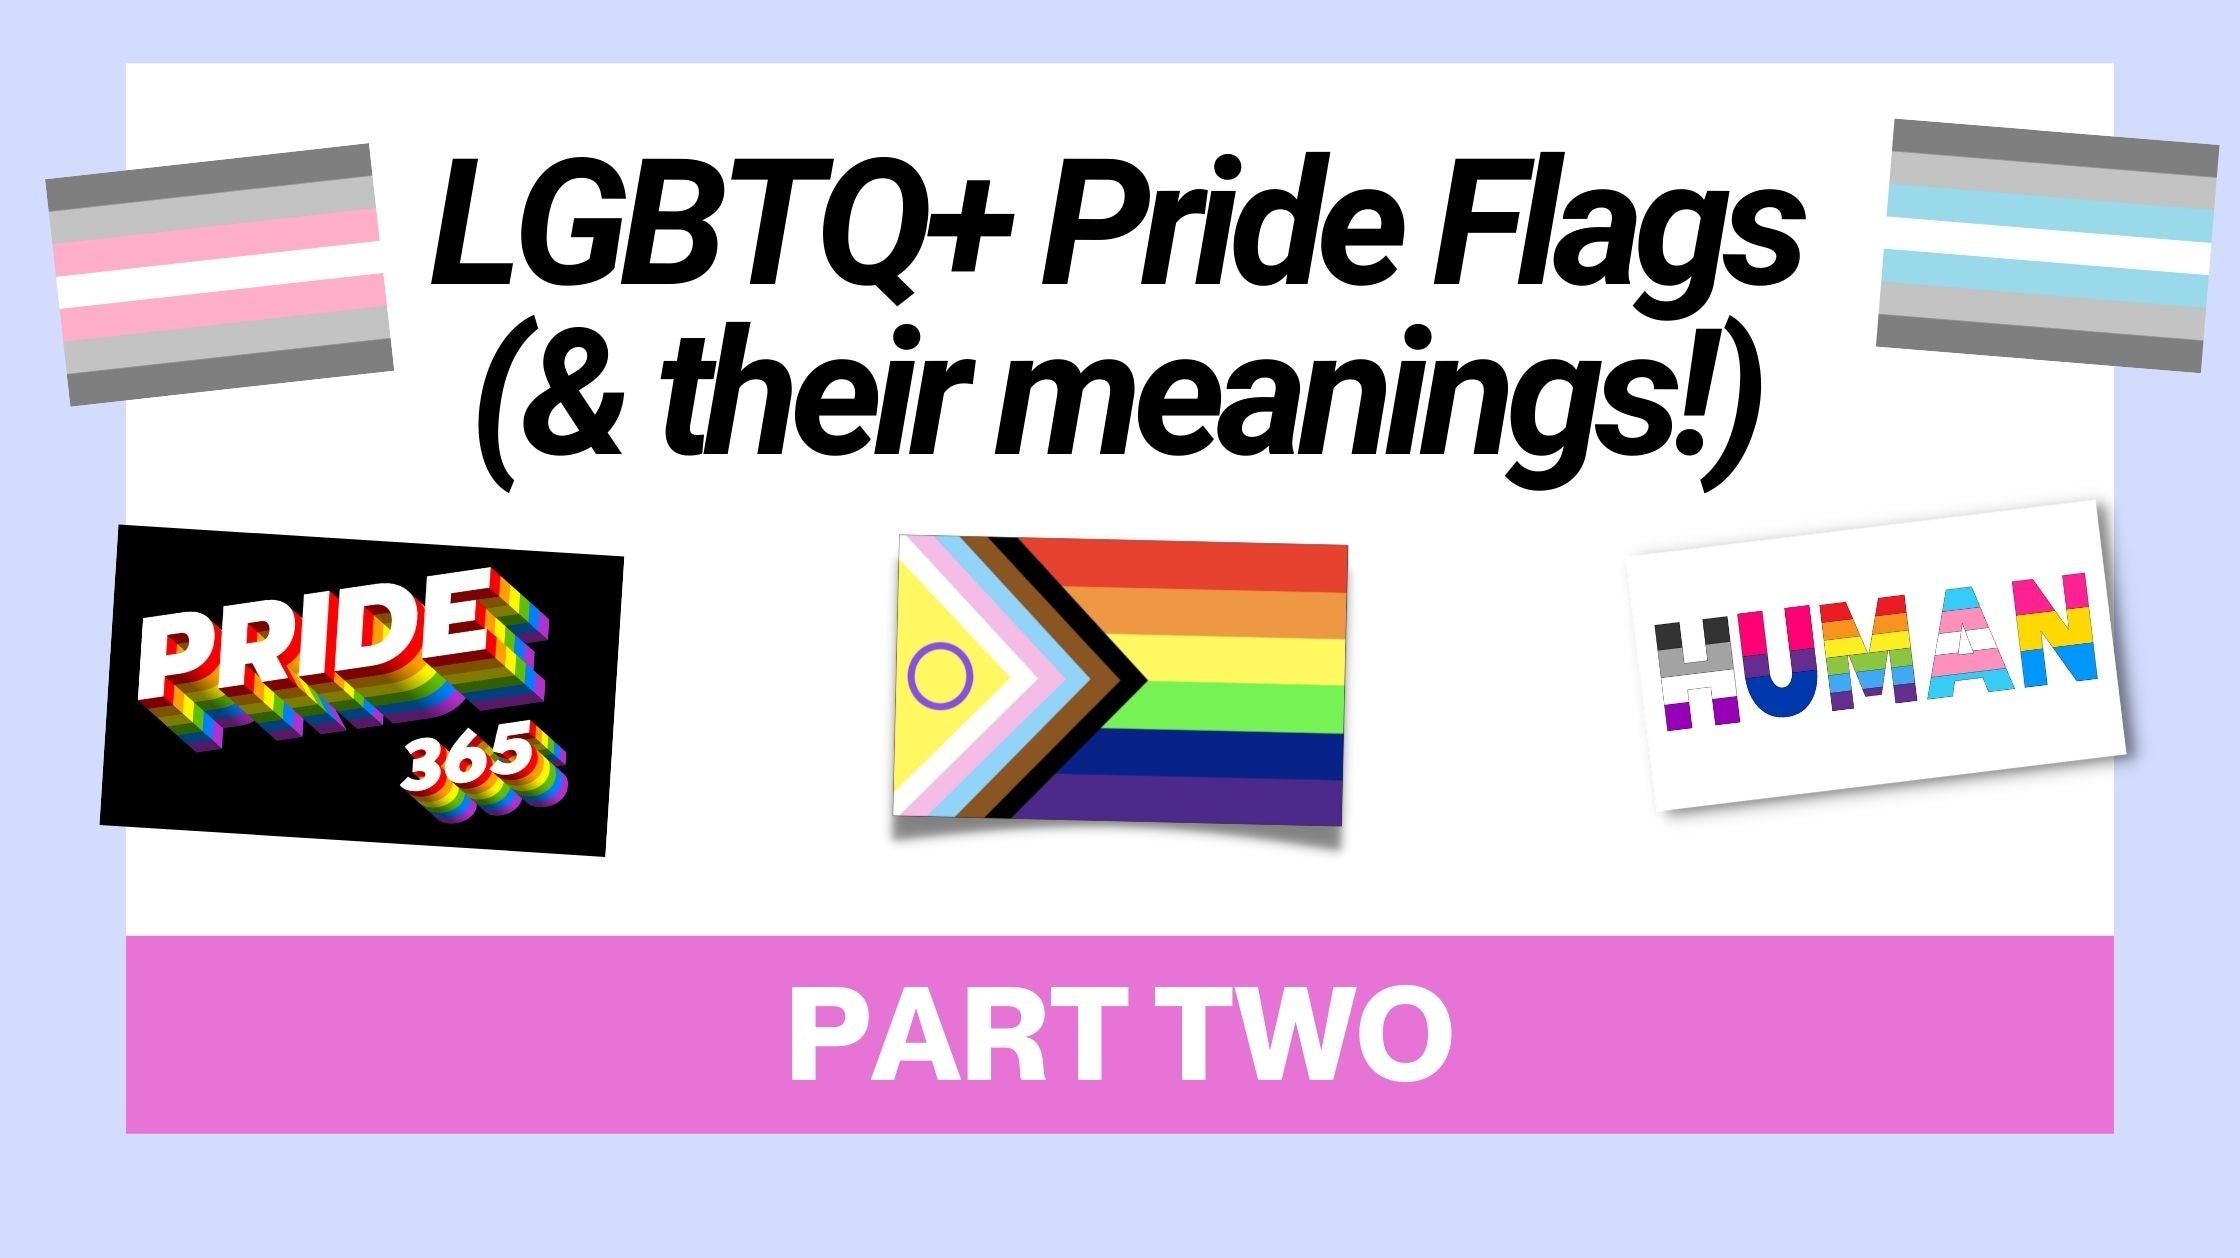 LGBTQ+ Pride Flags & Their Meanings, Cont.